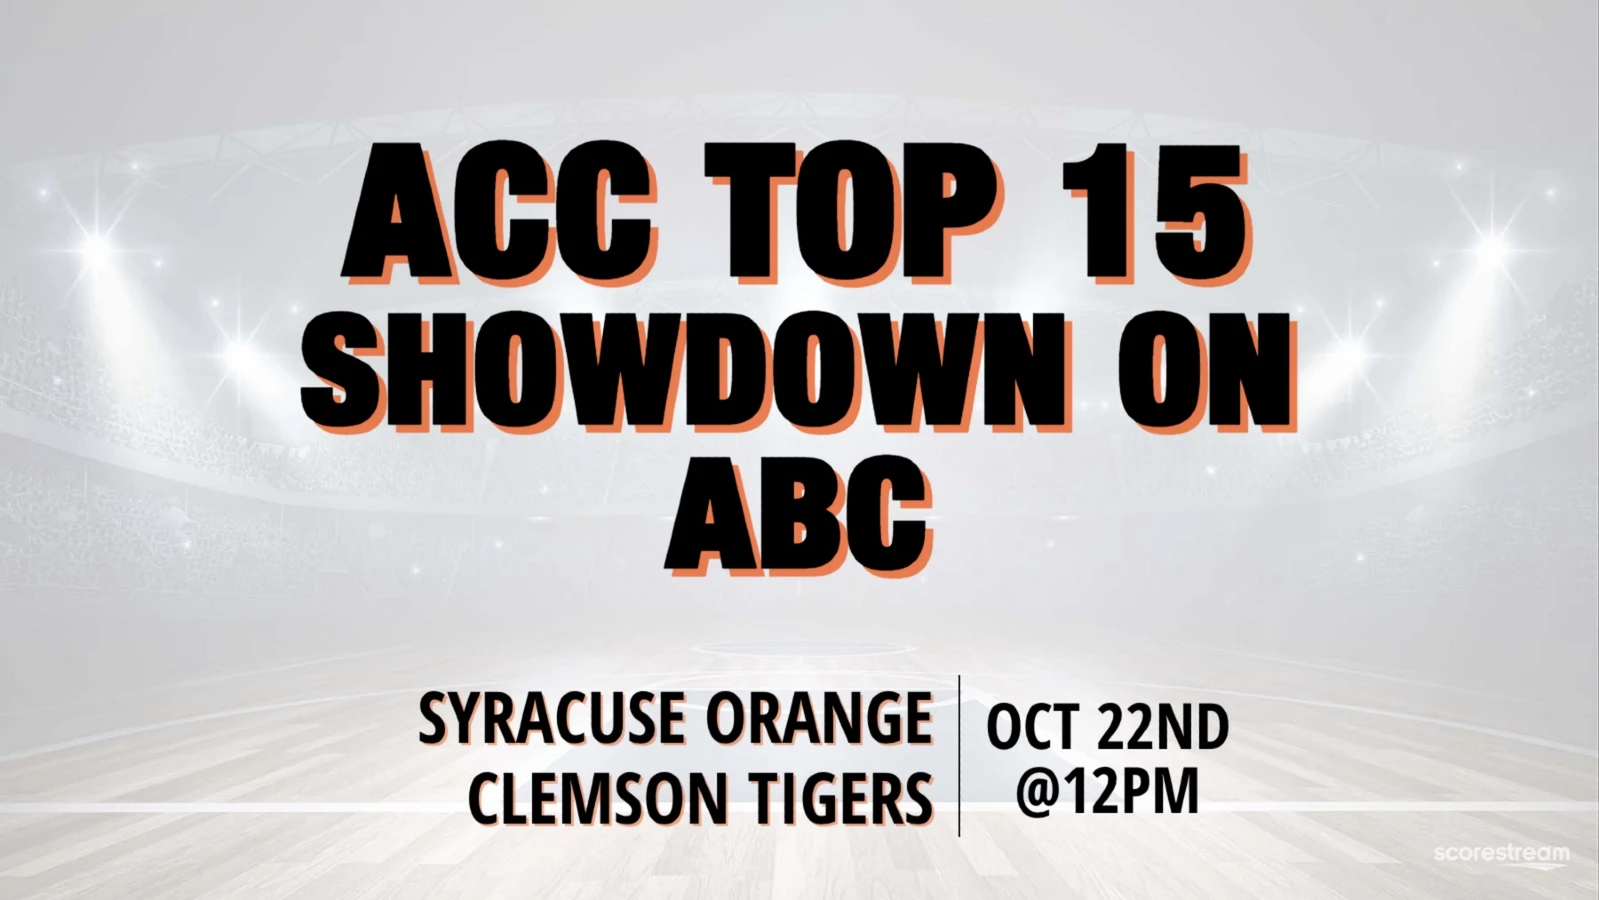 How to watch No. 5 Clemson vs No. 14 Syracuse? Who will win today?